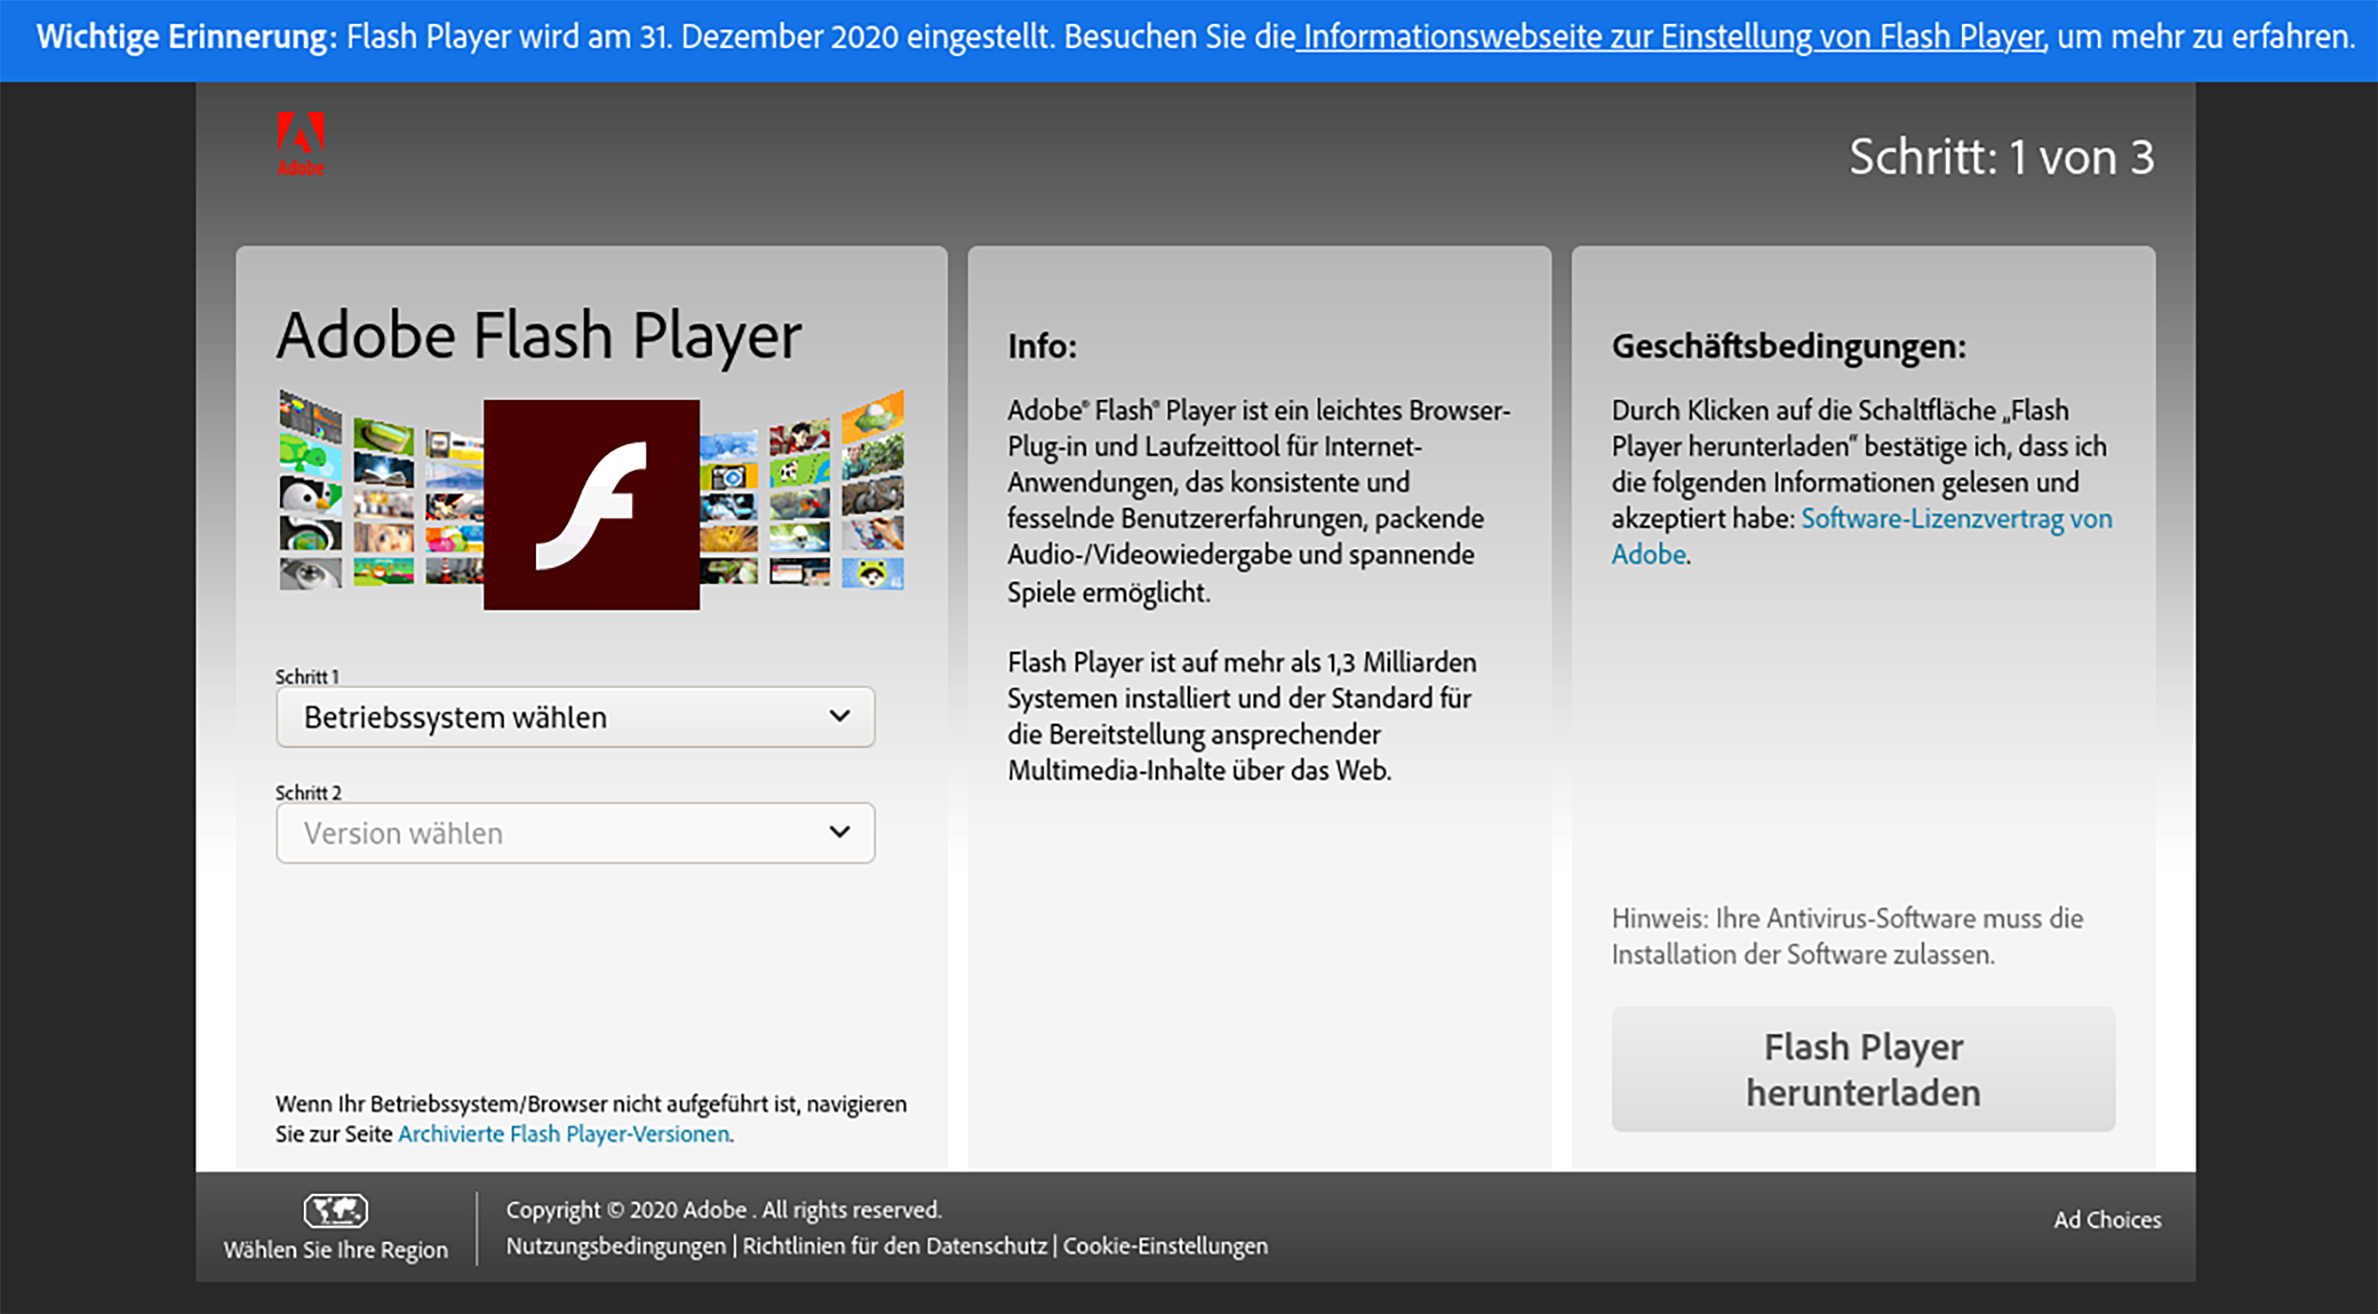 download latest version of adobe flash player for google chrome